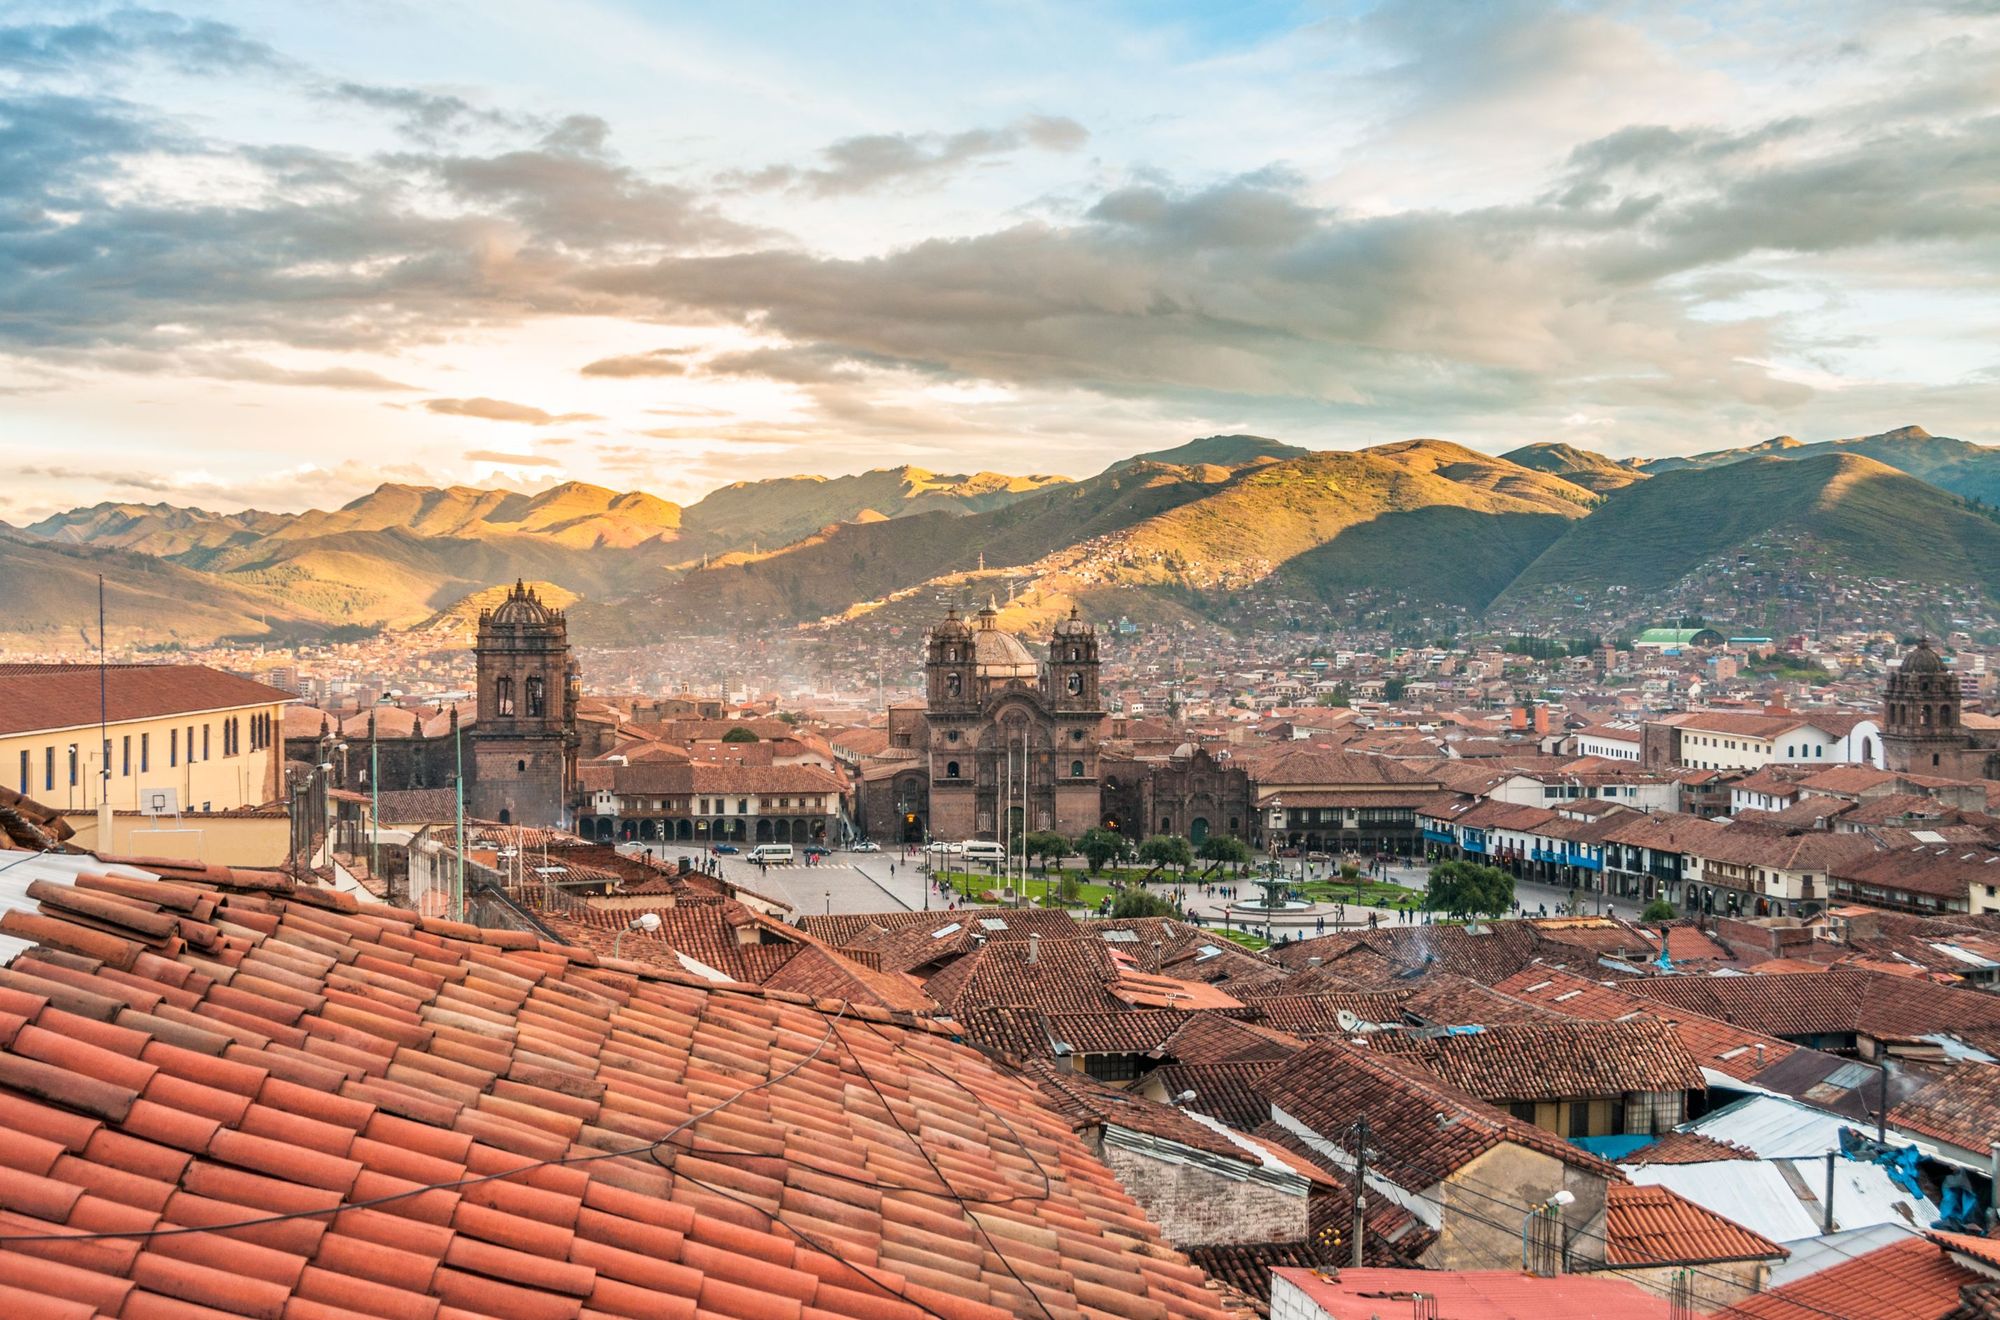 A modern view of Cusco, the city high in the Peruvian Andes. Photo: Getty